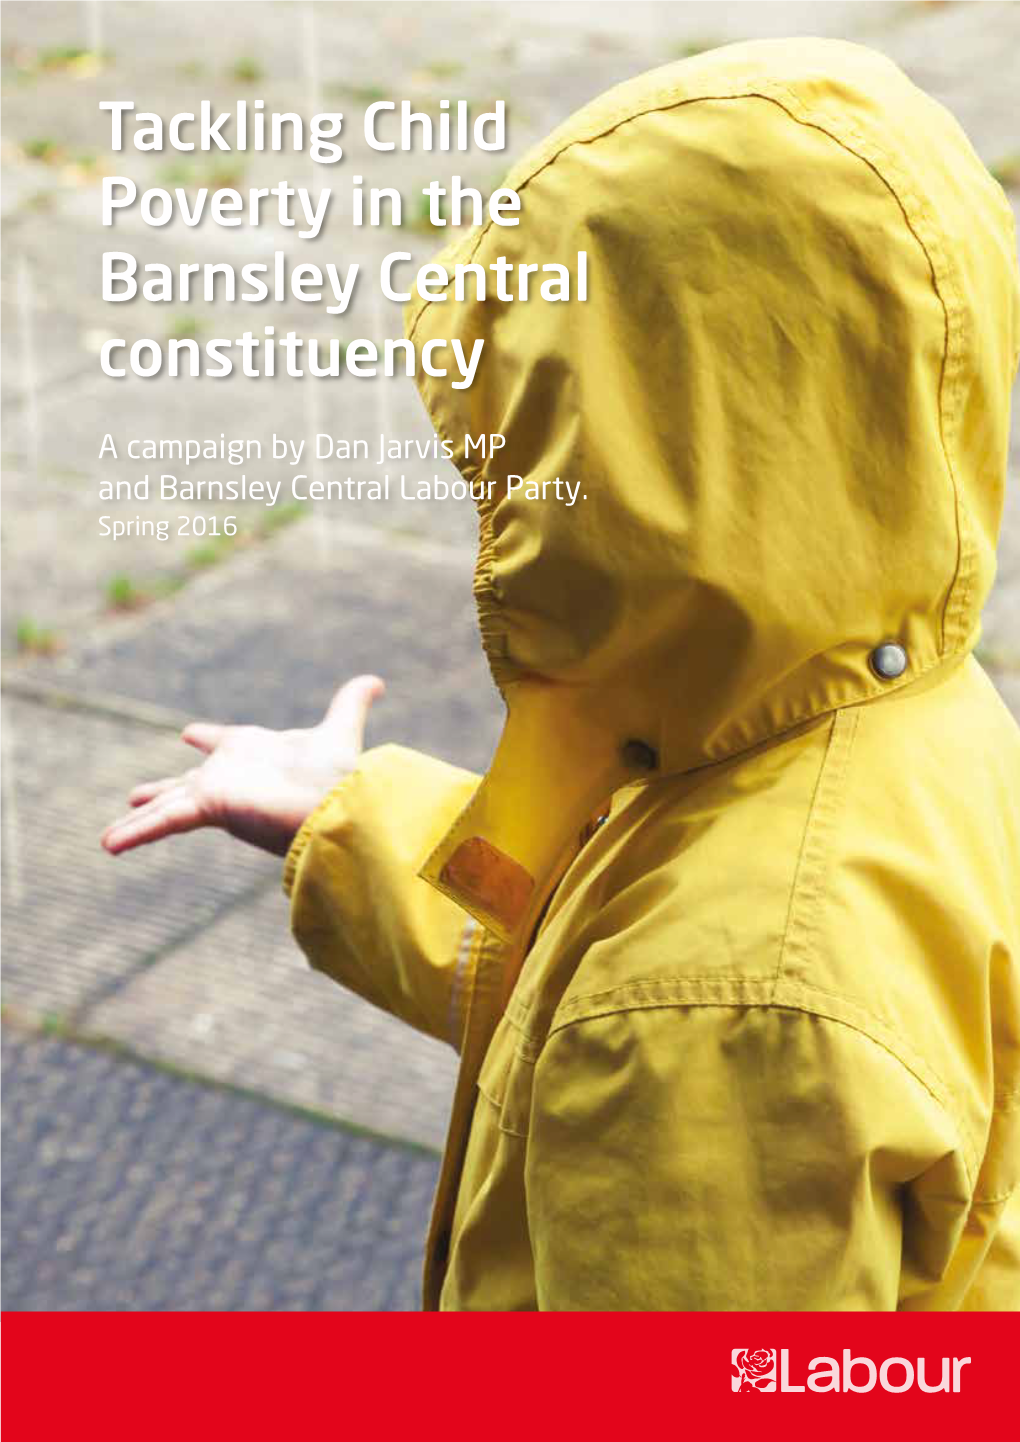 Tackling Child Poverty in the Barnsley Central Constituency